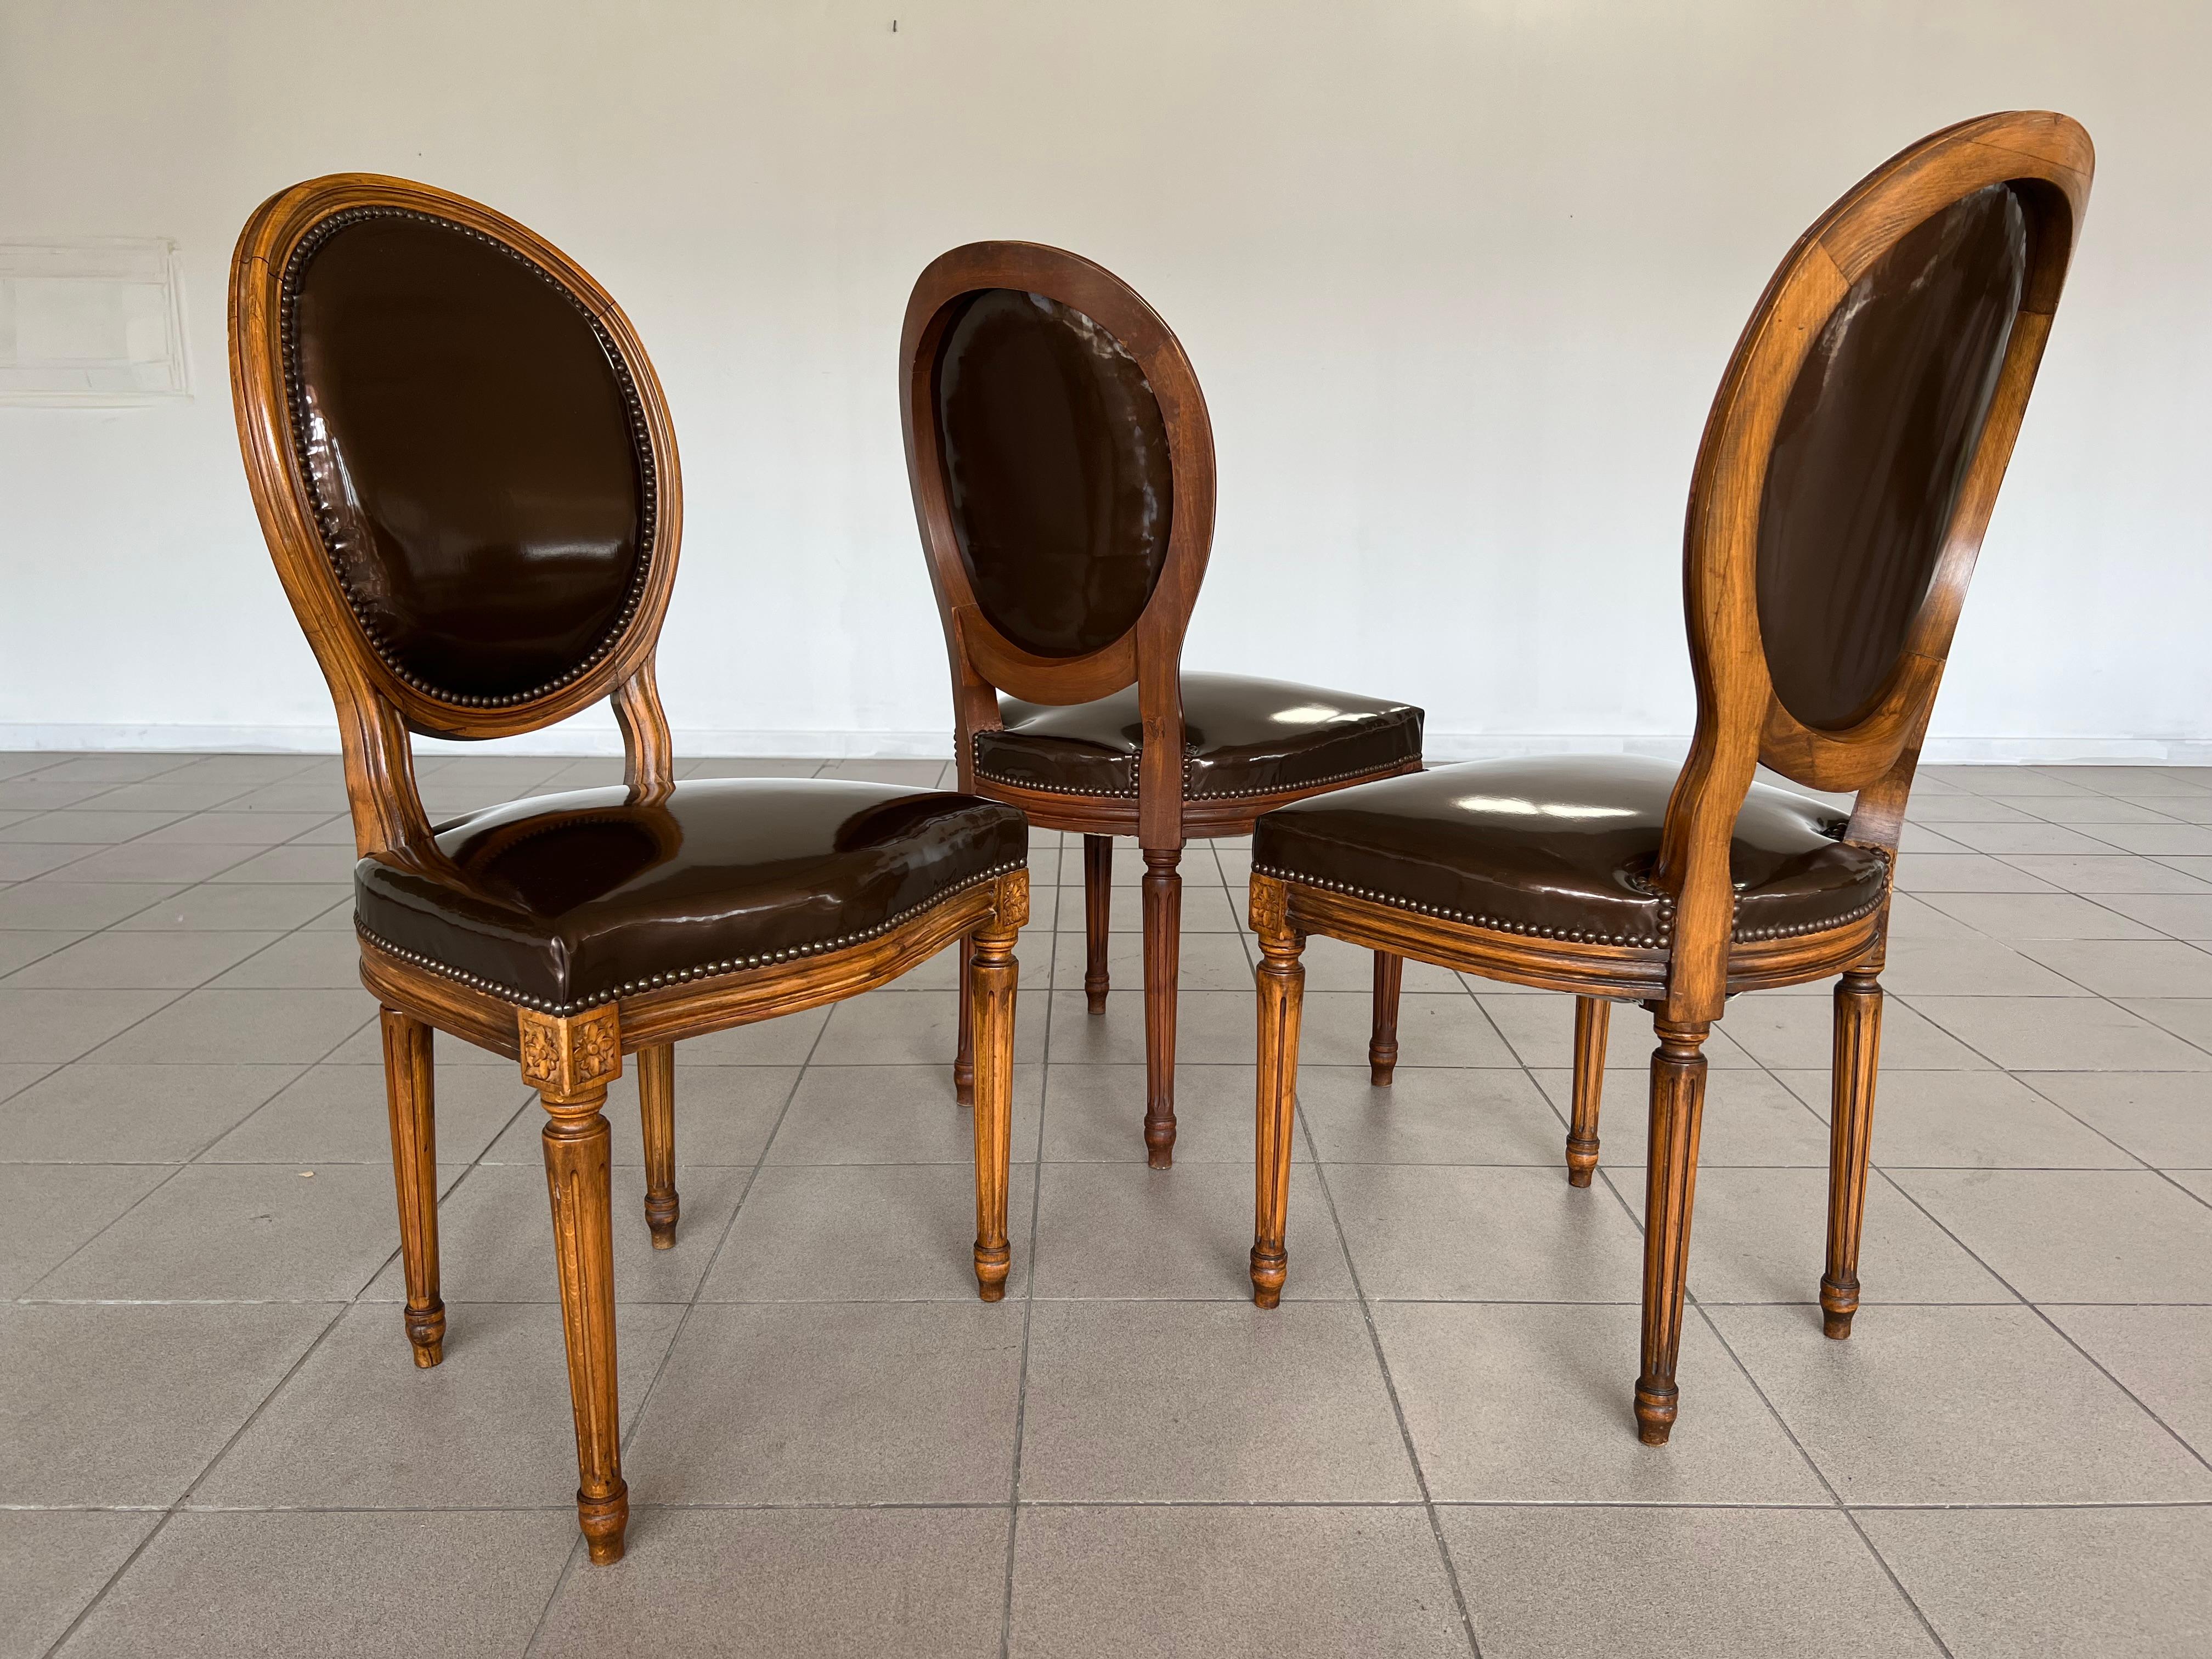 French Louis XVI Dining Room Chairs, Faux Leather Upholstery - Set of 12 4